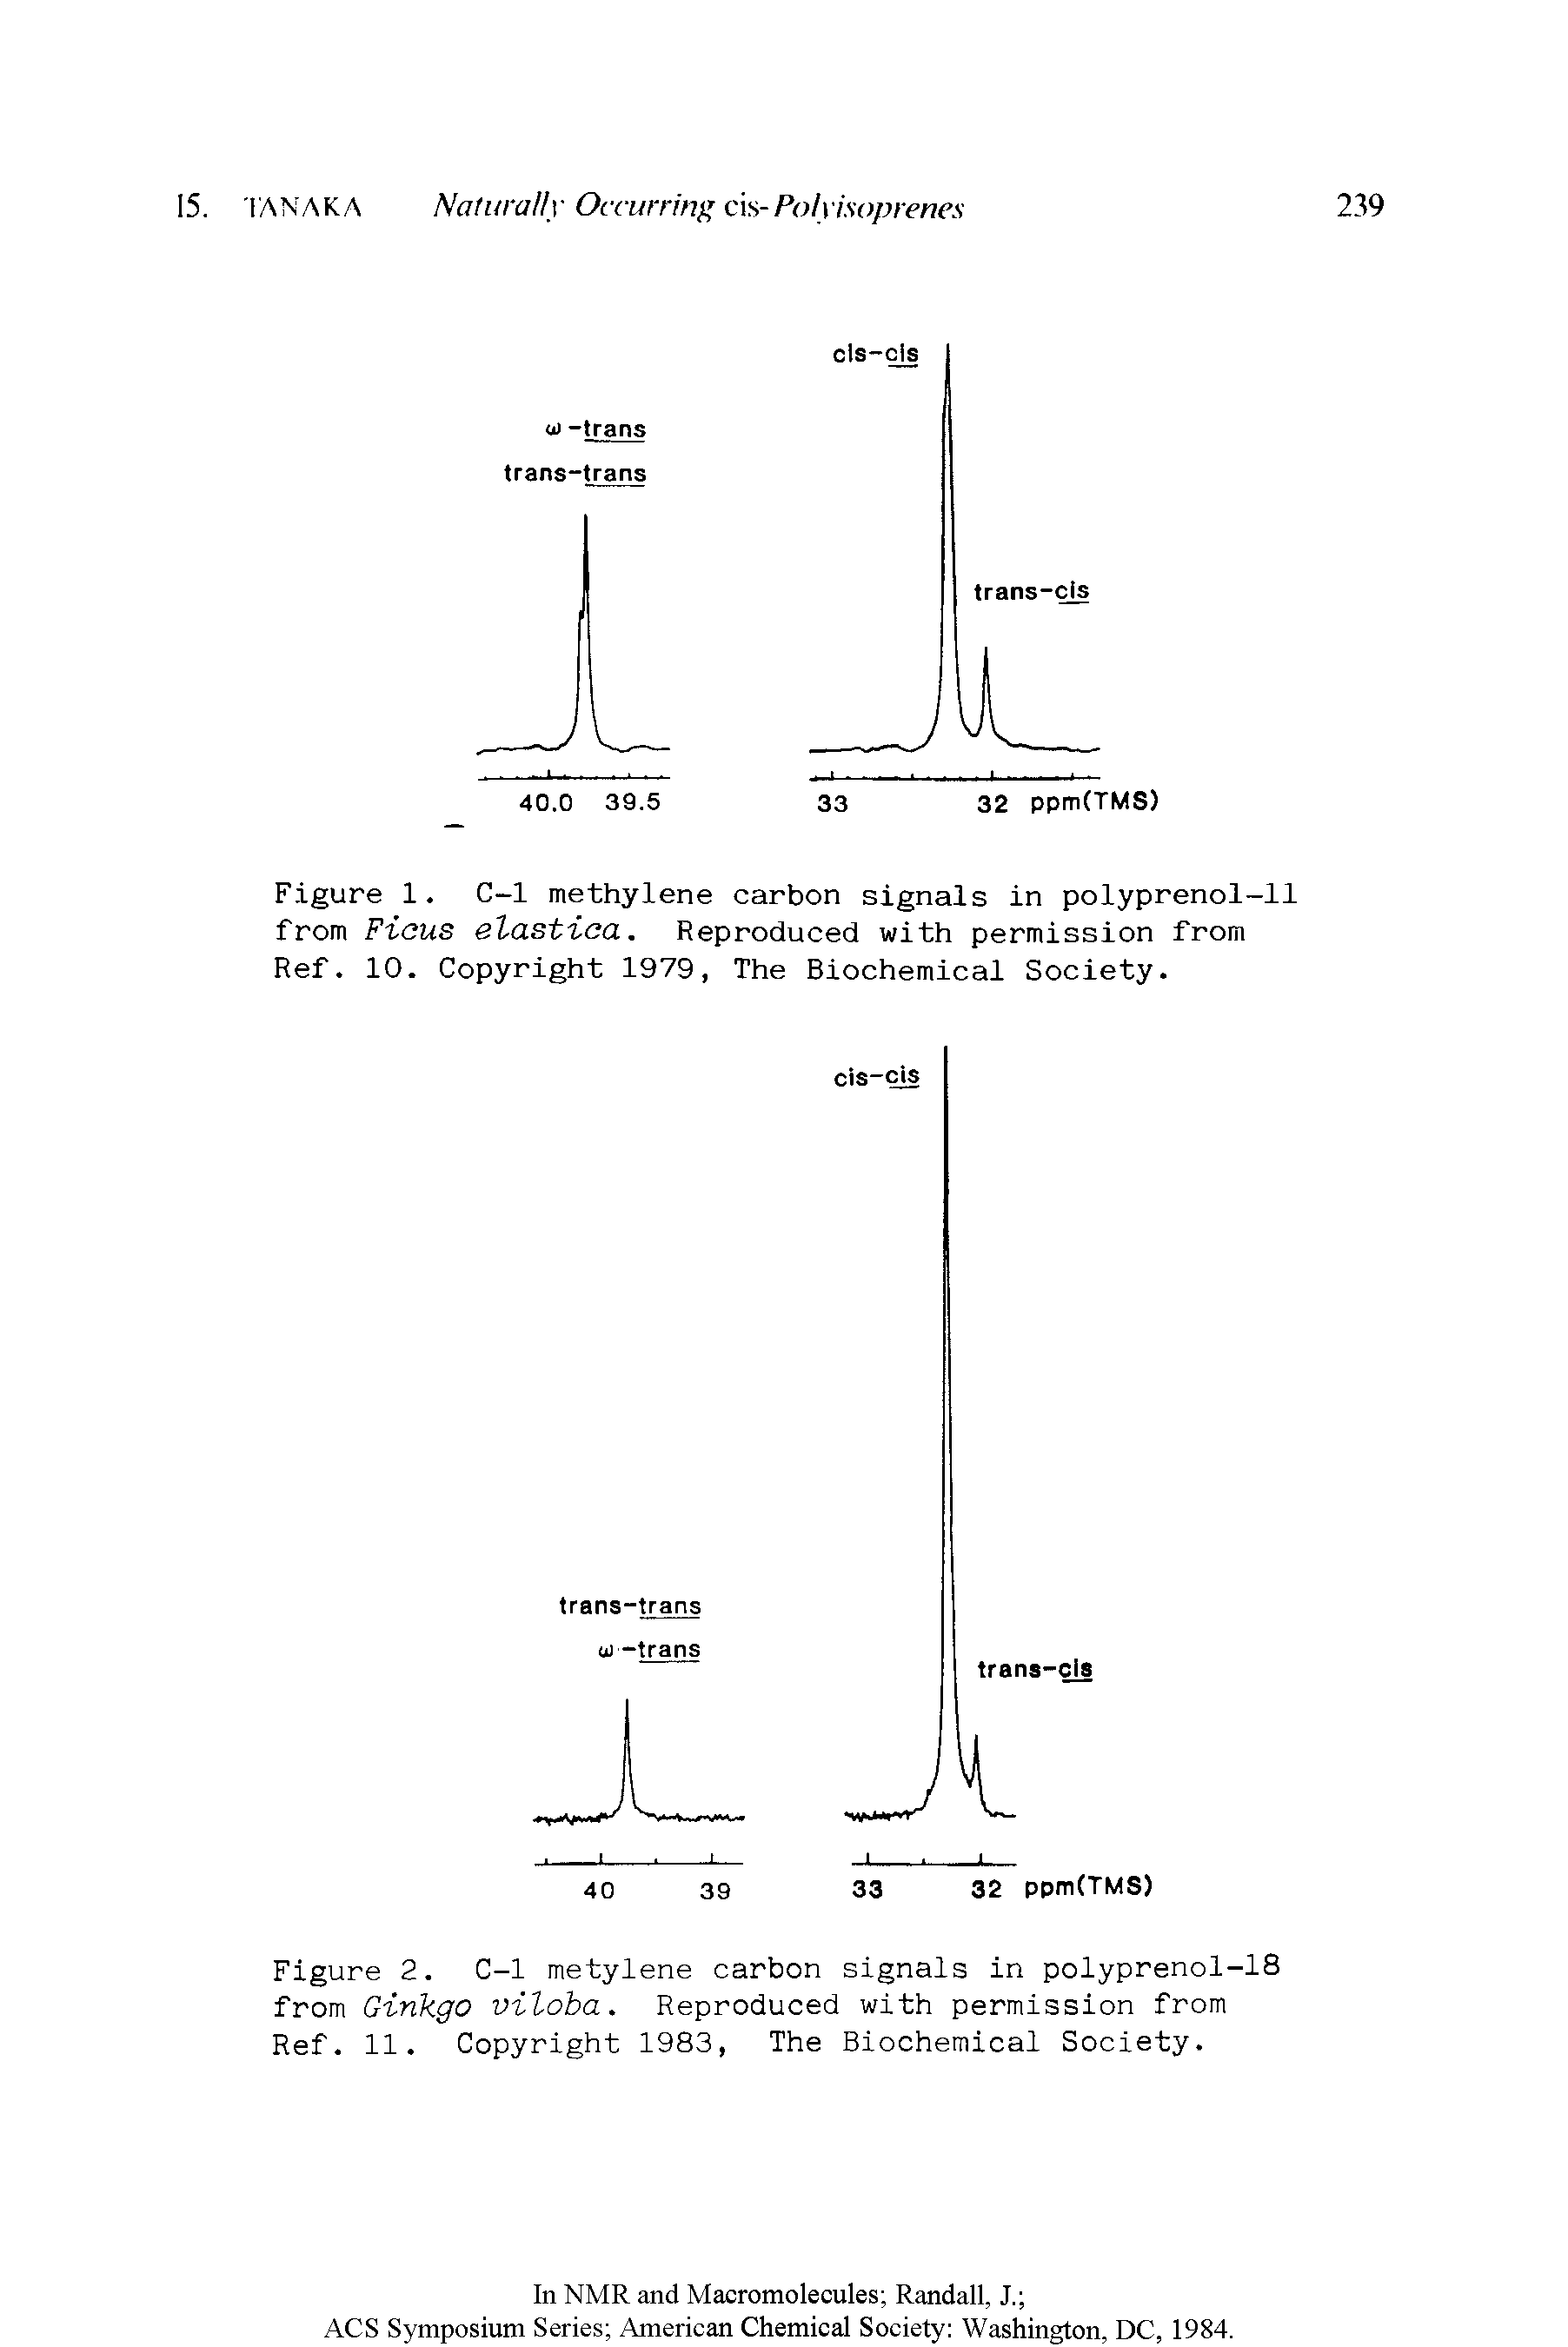 Figure 1. C-l methylene carbon signals in polyprenol-11 from Ficus elastica. Reproduced with permission from Ref. 10. Copyright 1979, The Biochemical Society.